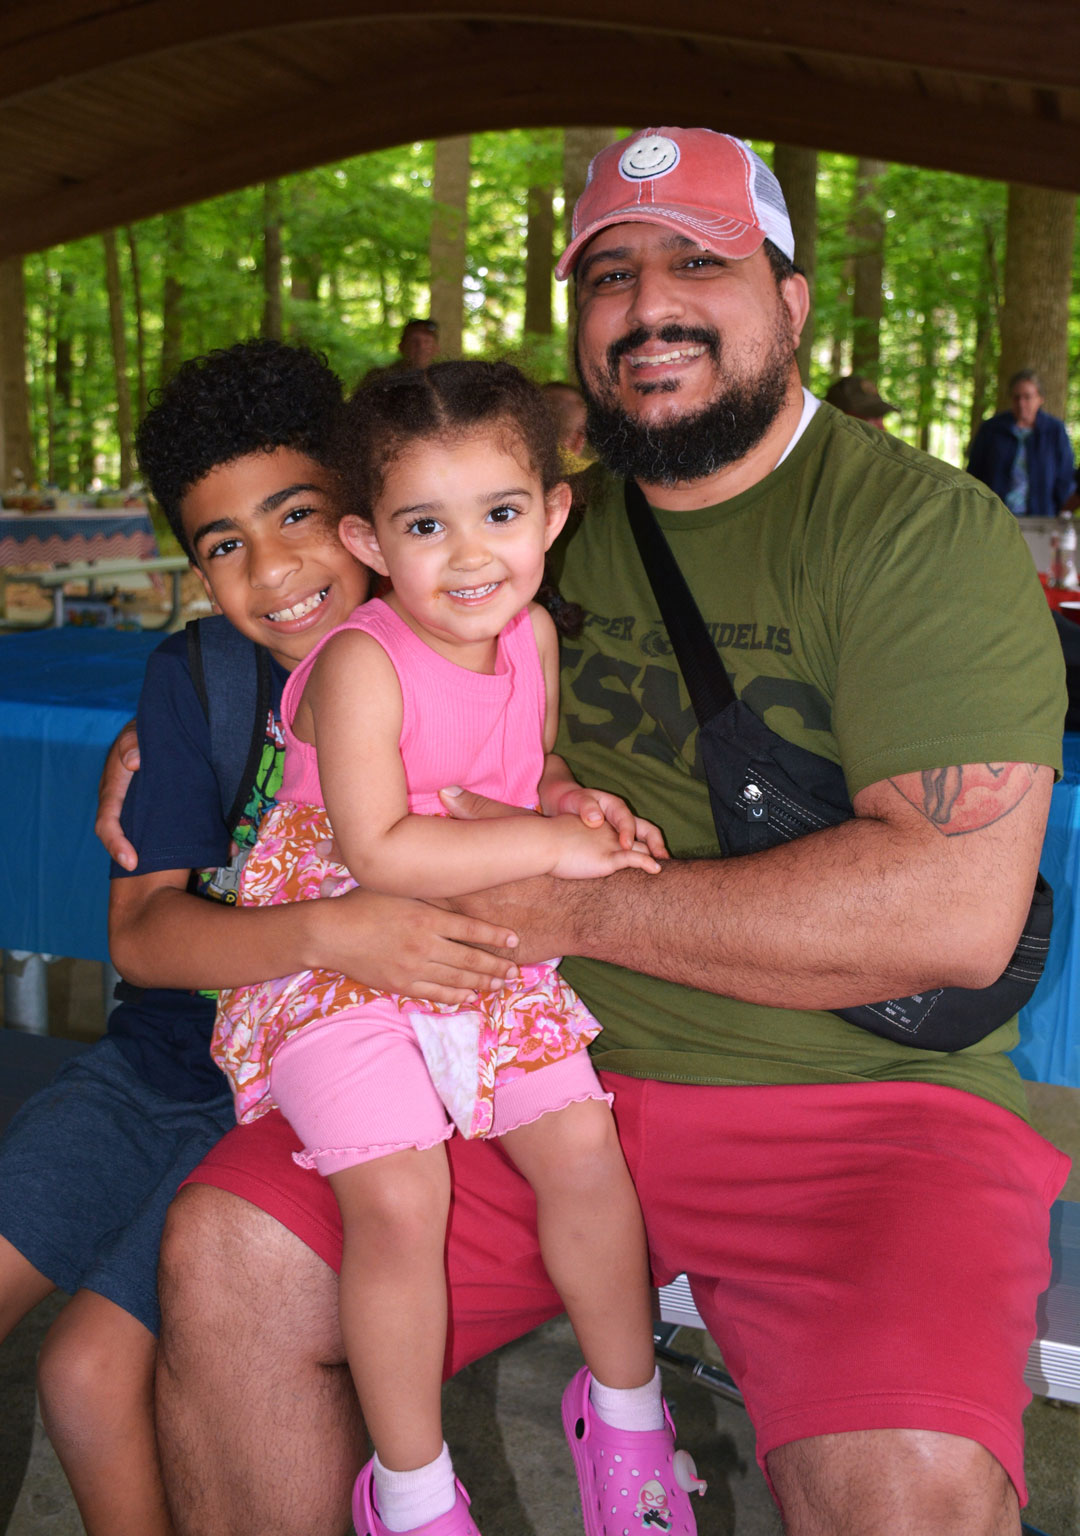 Johuanny Torres brought his children to the picnic.  They had a great time playing in the park. (Photography courtesy of Bert Wendell, Jr.)